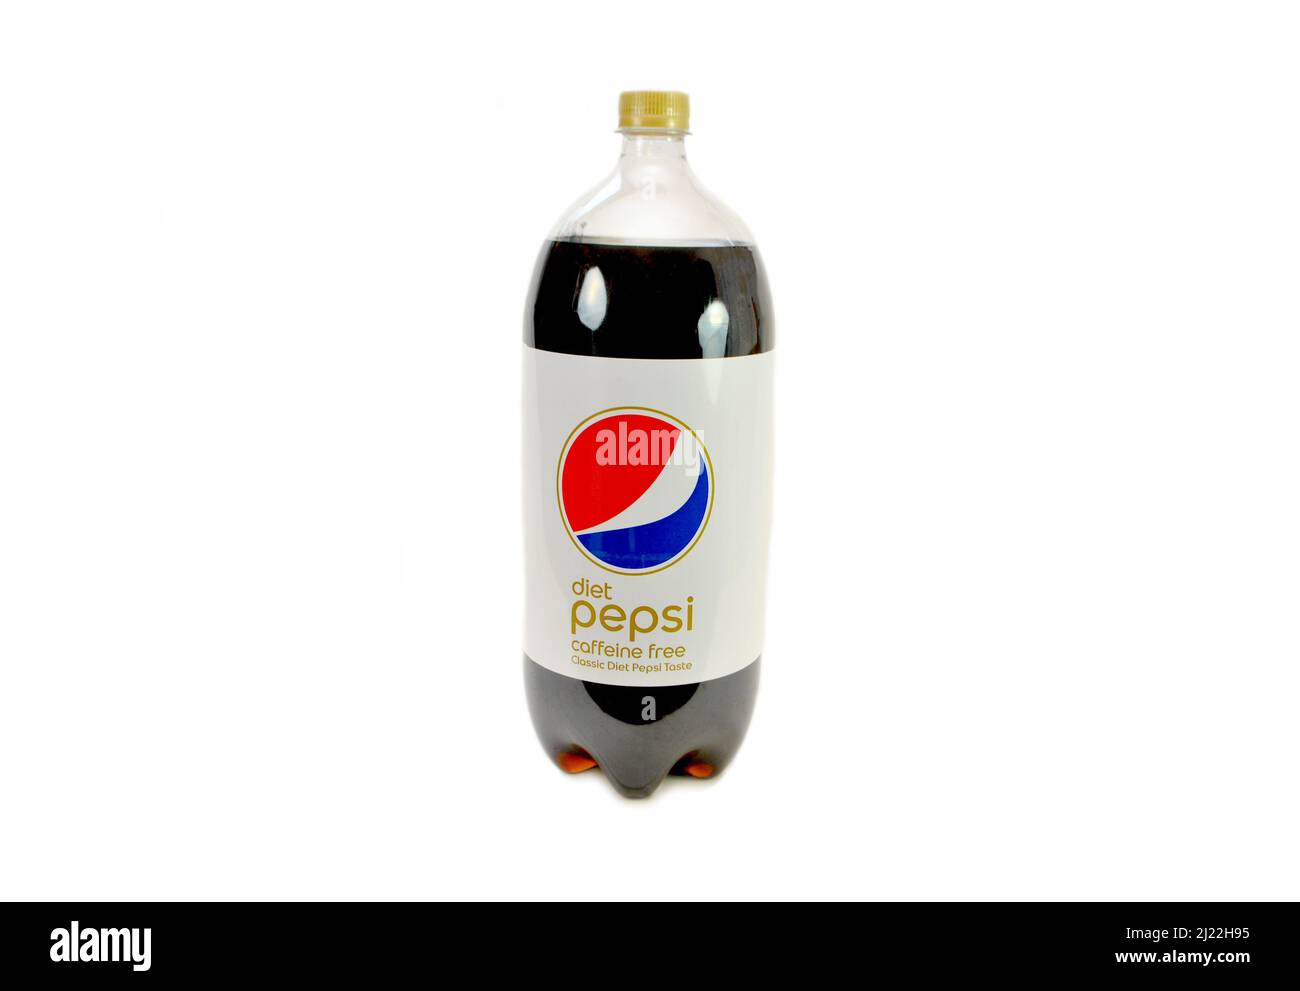 Diet Pepsi (Caffeine Free) 2 Liter Bottle of Soda Isolated Over a White Background Stock Photo